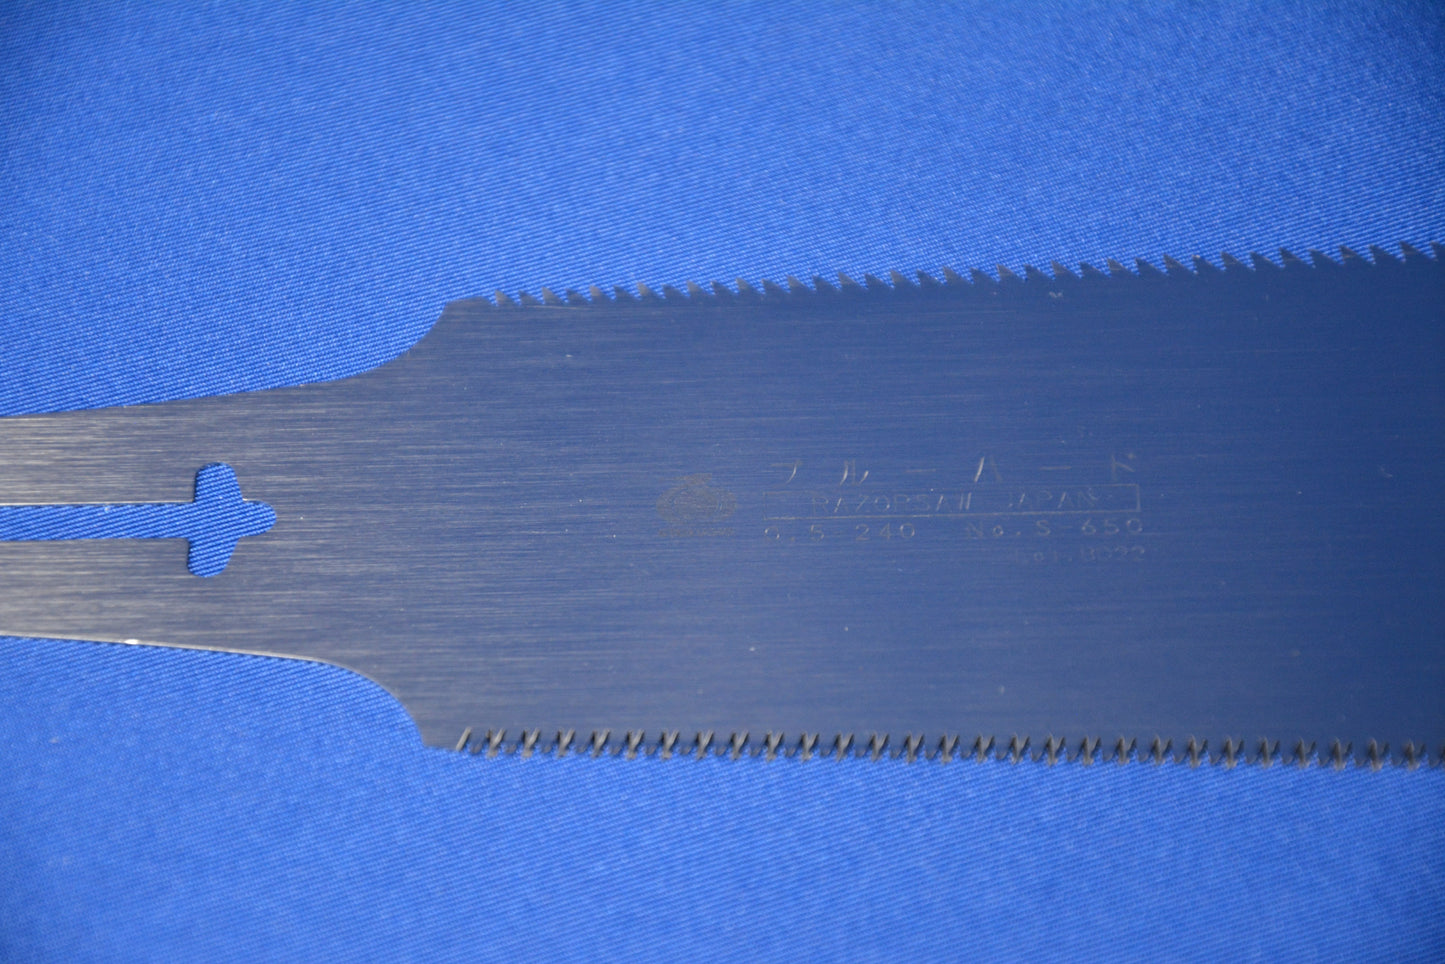 Gyokucho Blue Hard Double Edged 240mm Replacement Blade